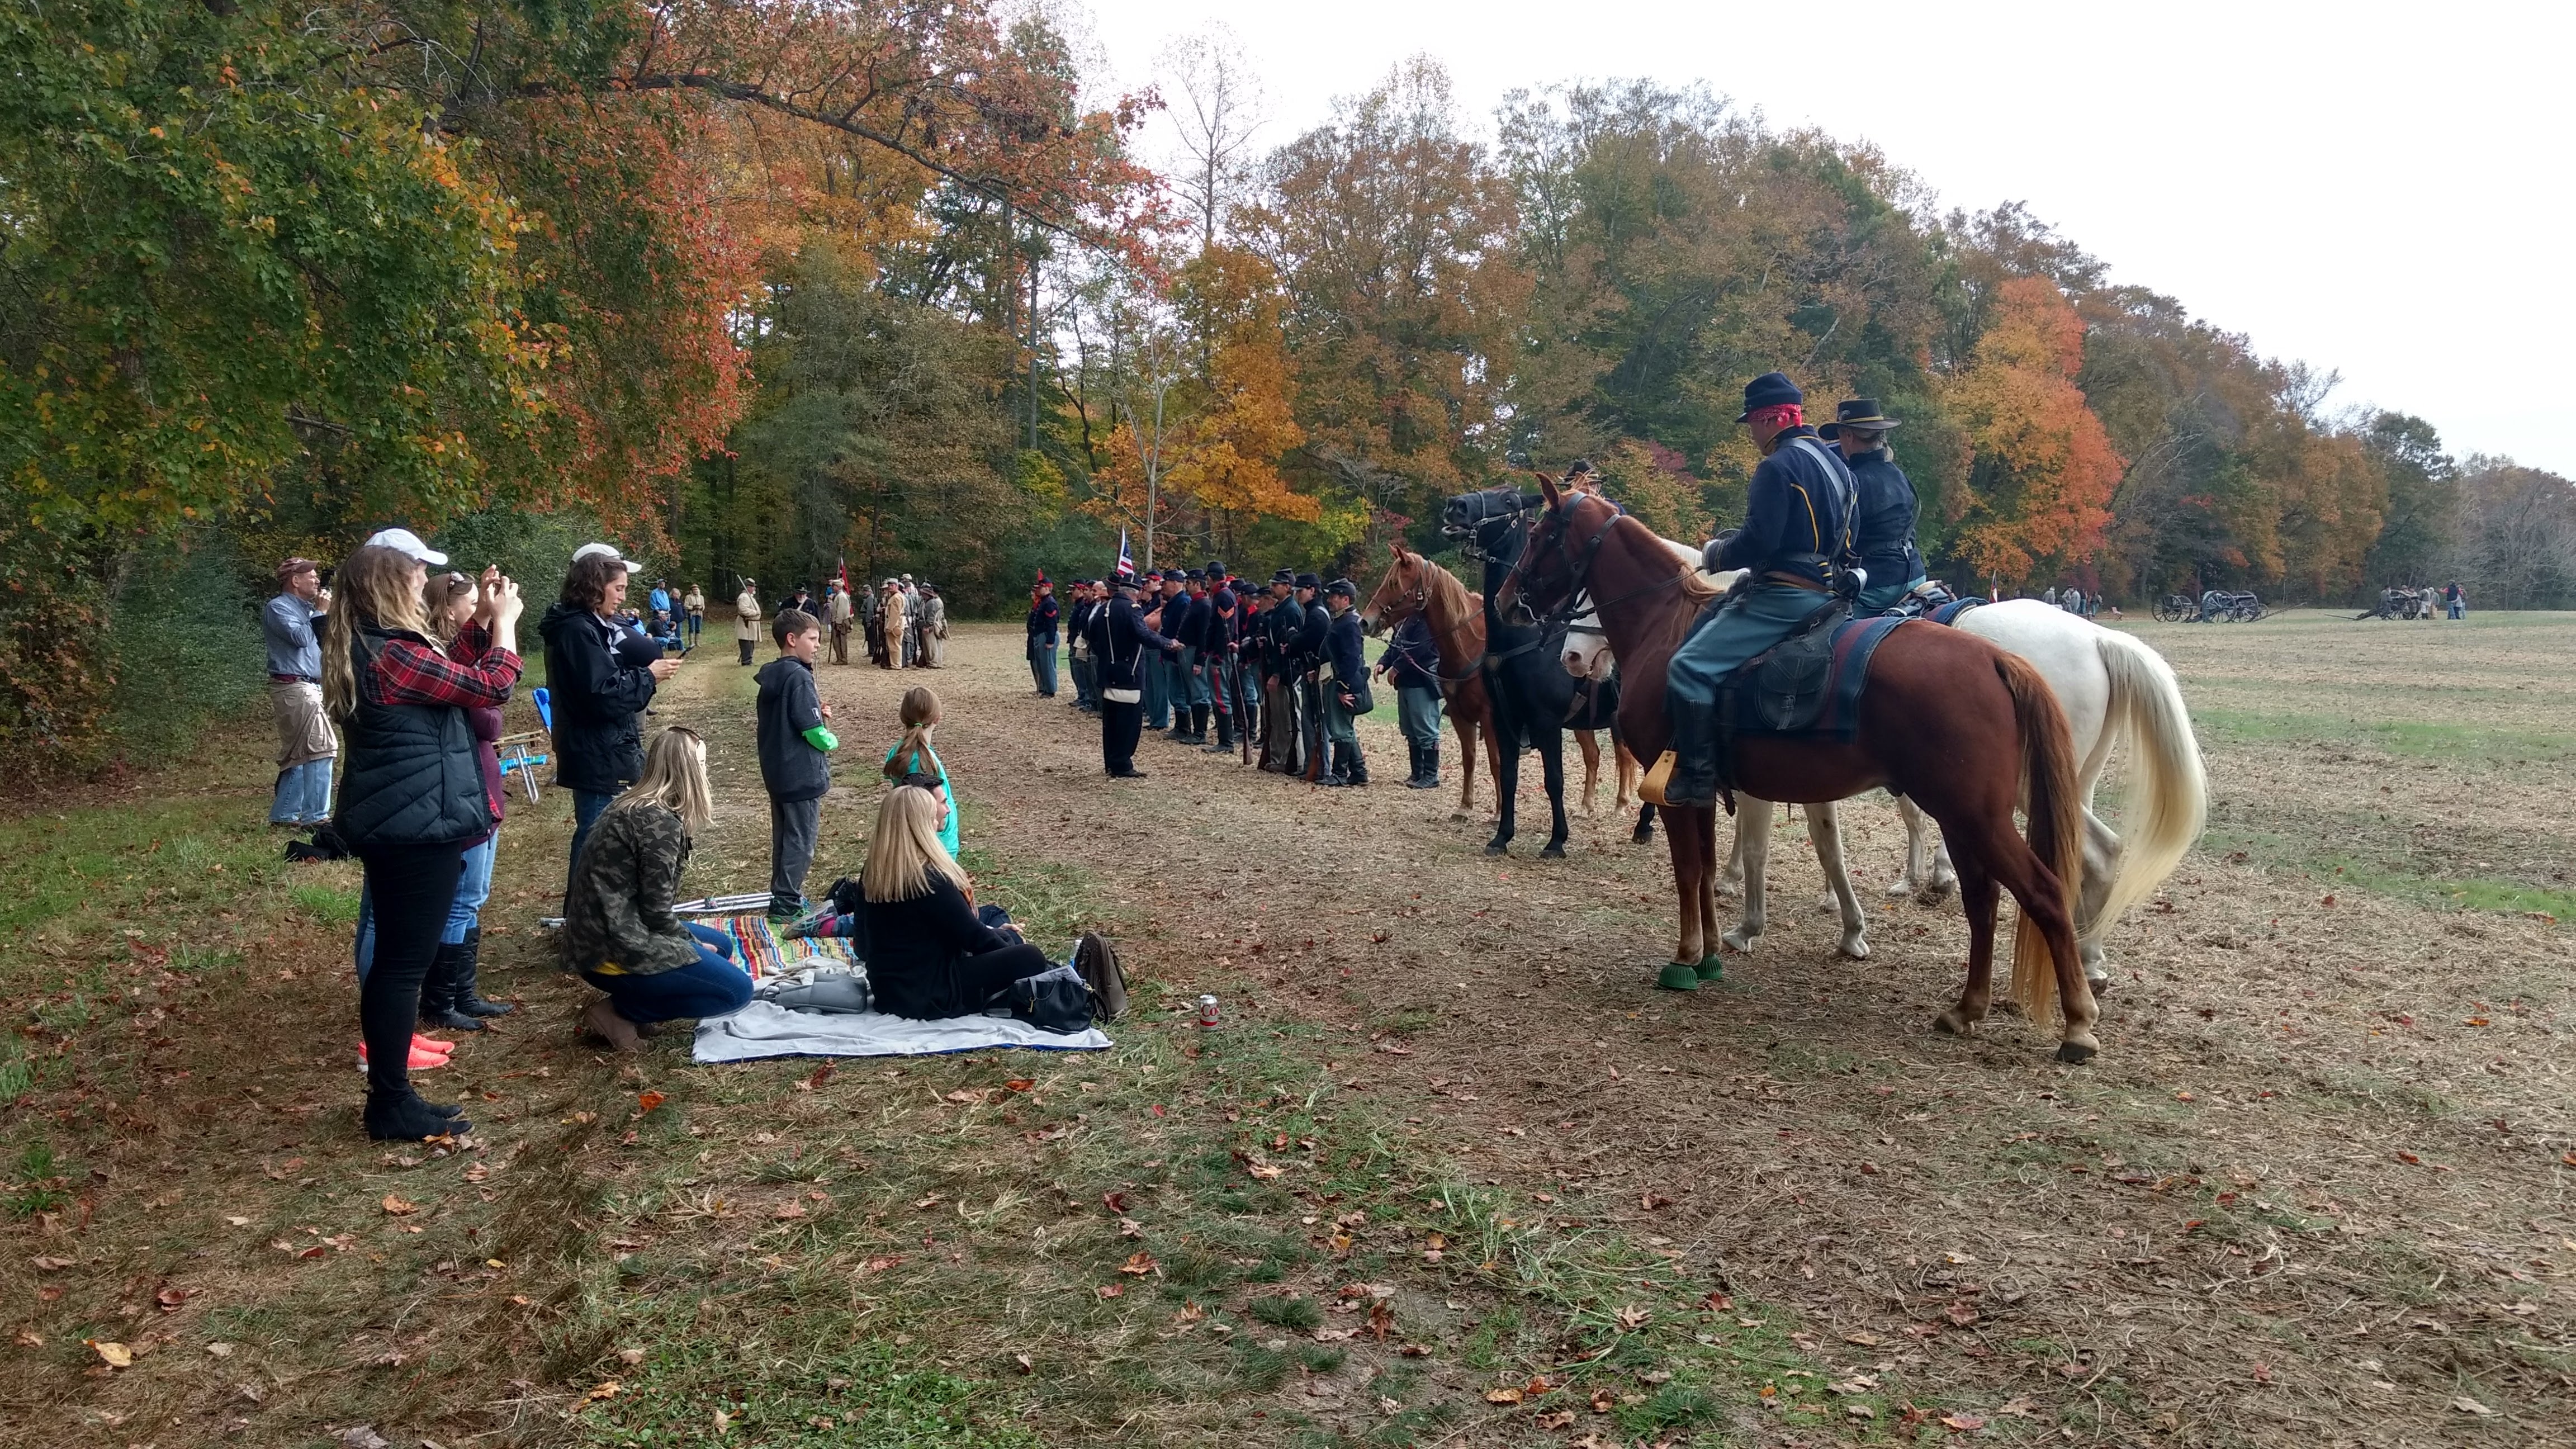 A Reenactment of the Wilderness Campaign in Virginia, Dec 2017